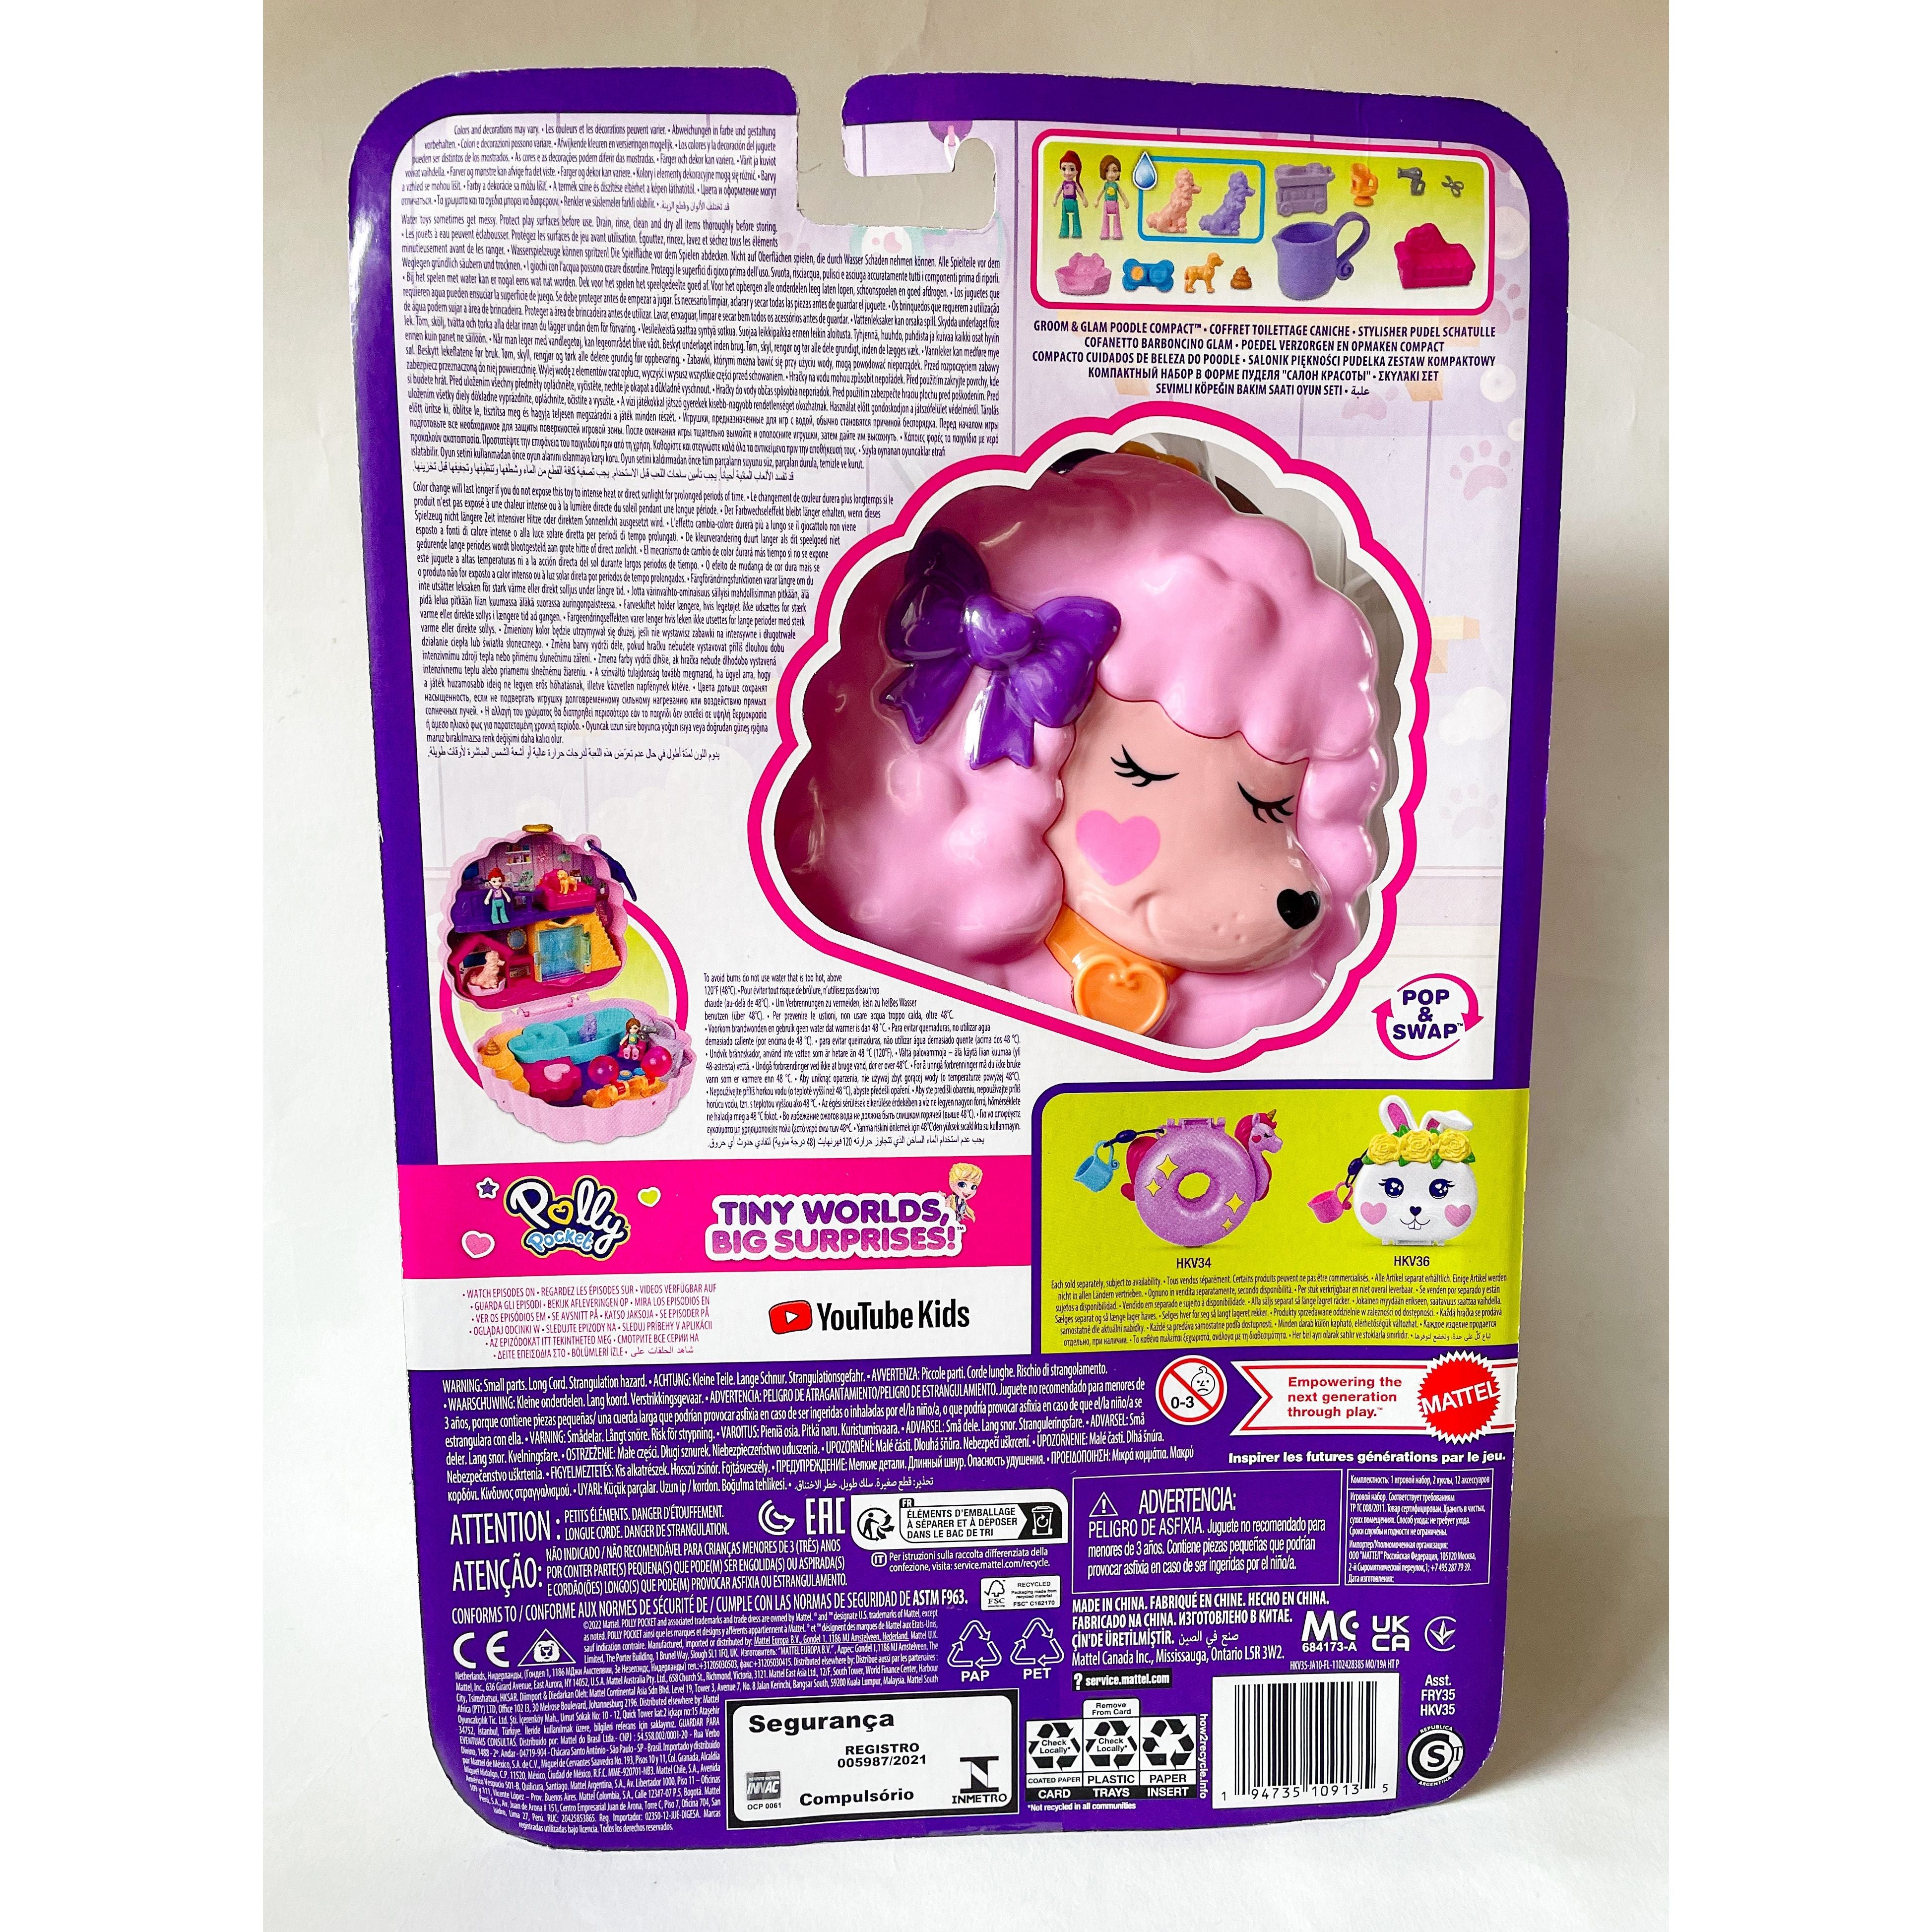 Polly Pocket Groom & Glam Poodle Compact Polly Pocket